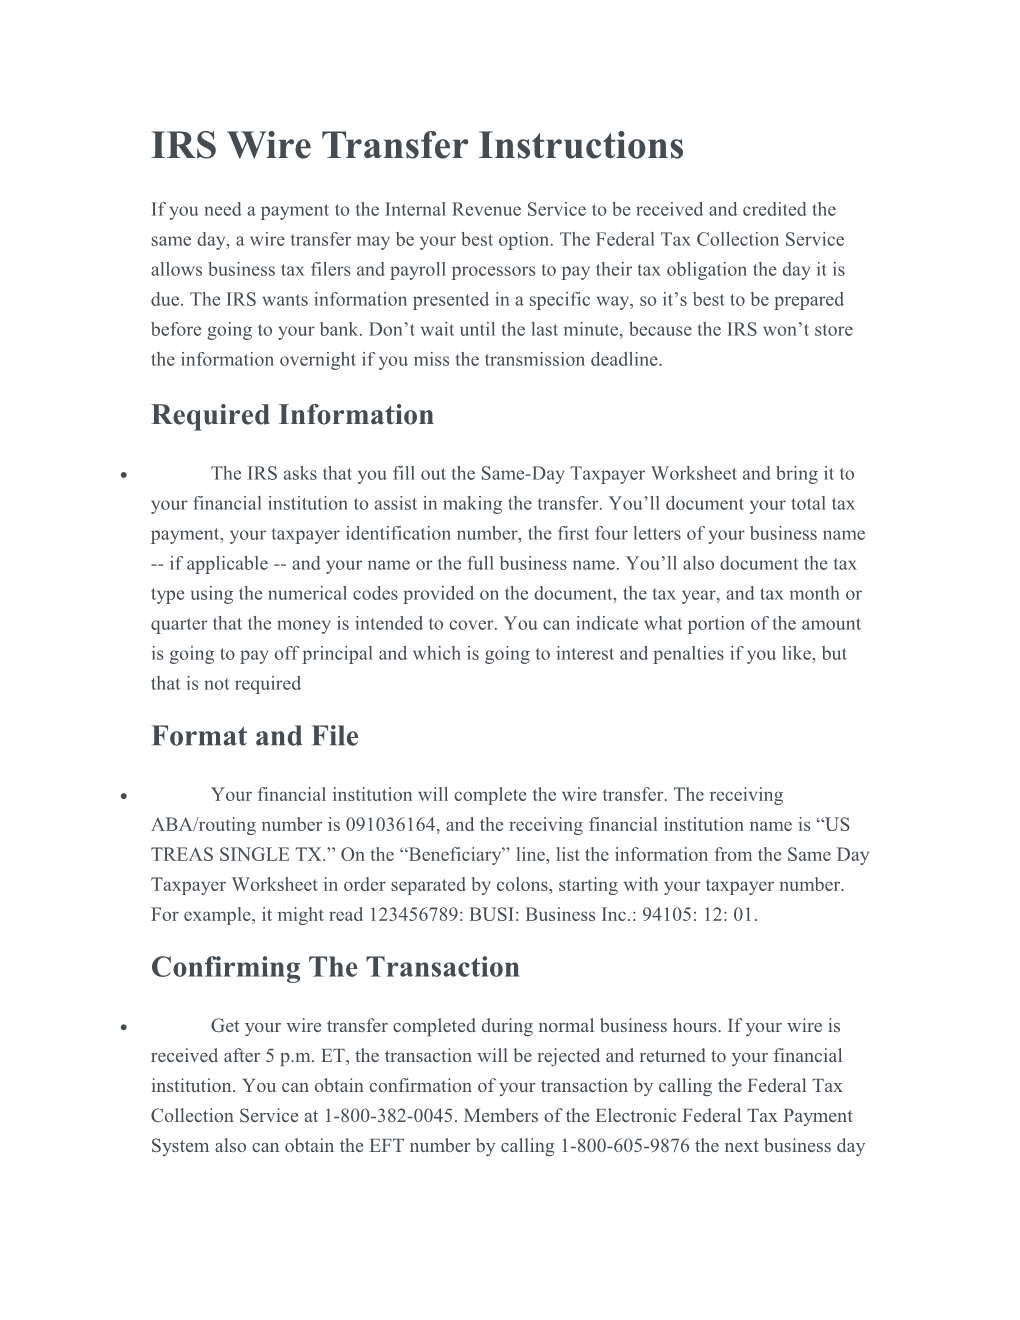 IRS Wire Transfer Instructions